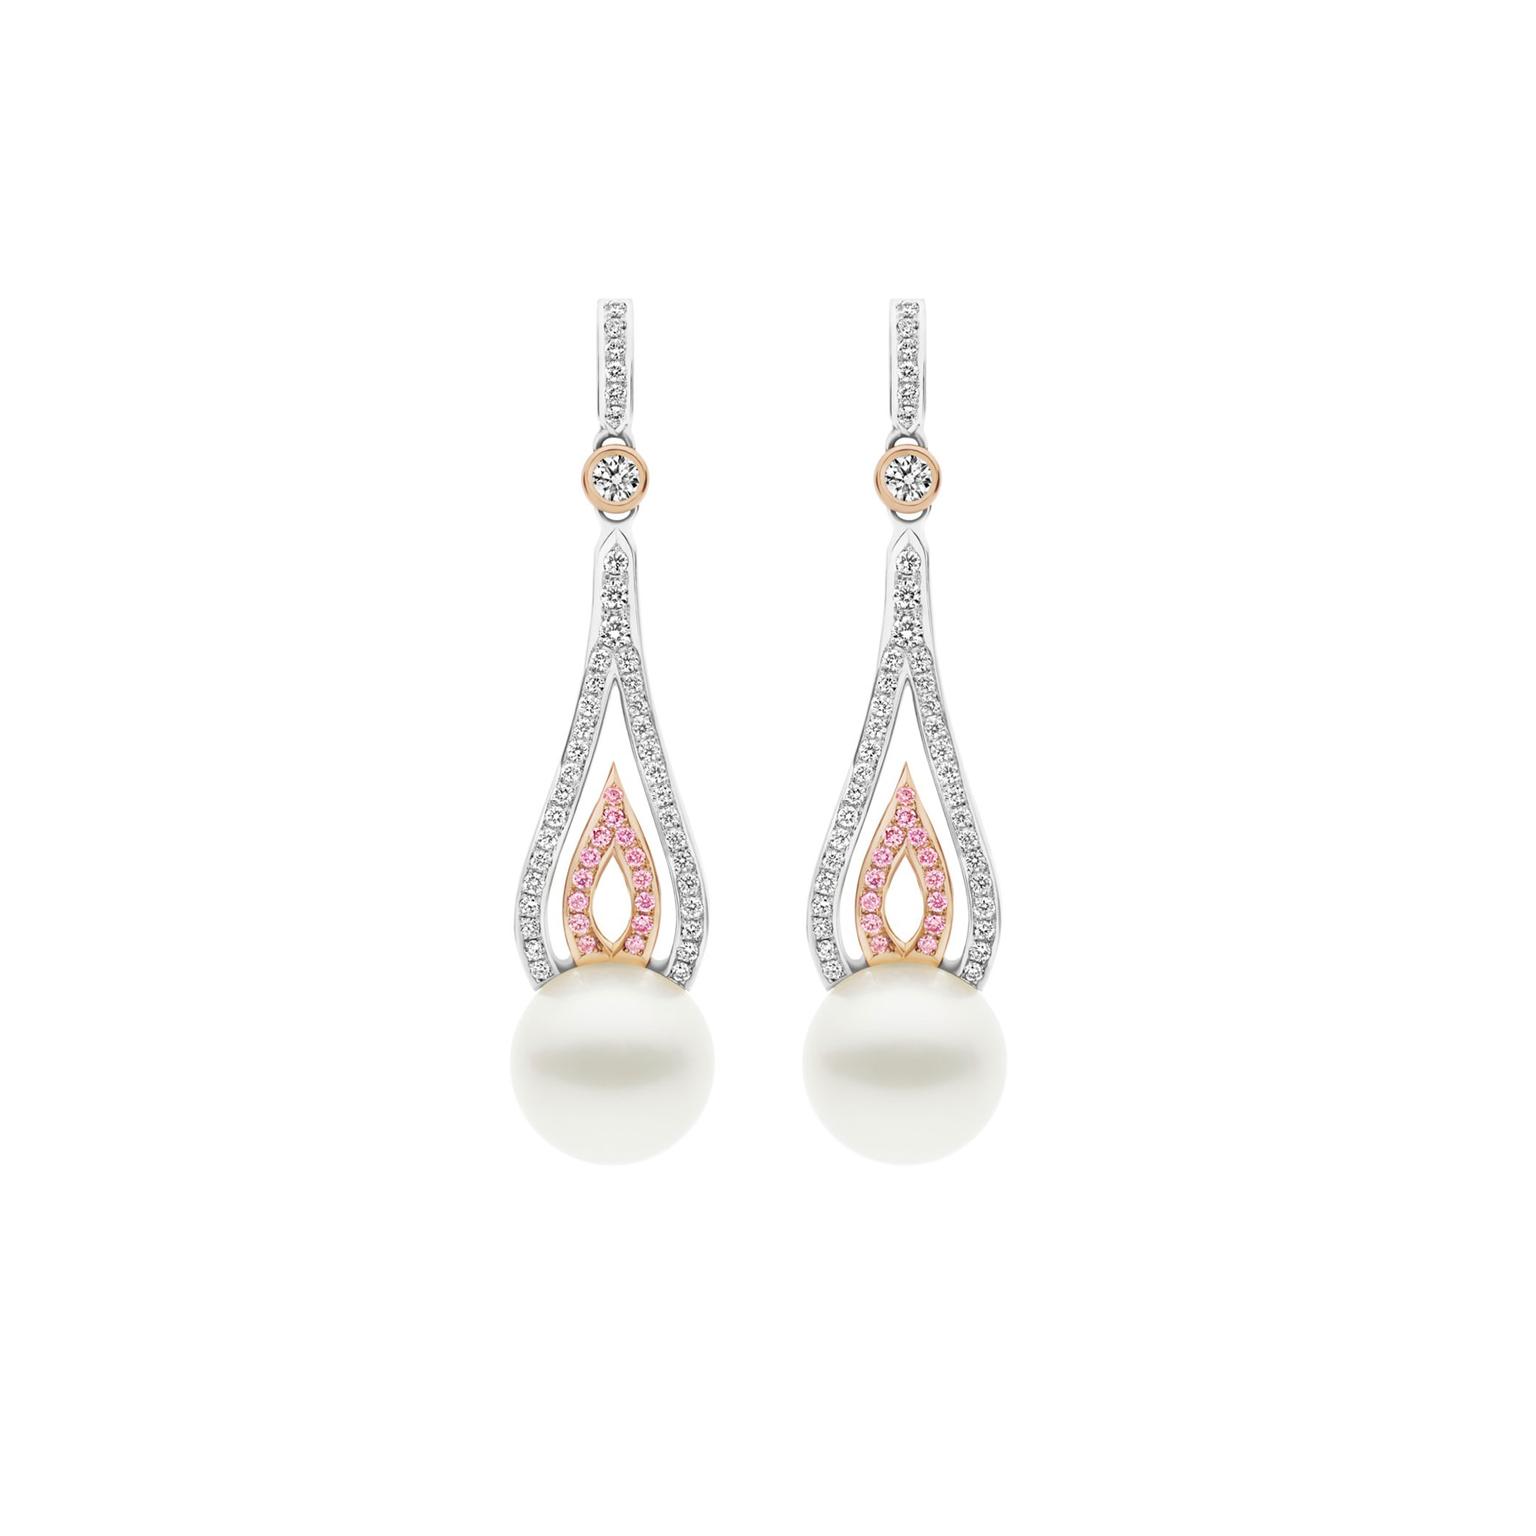 Kailis flame earrings with pearls and white and pink pavé diamonds_zoom